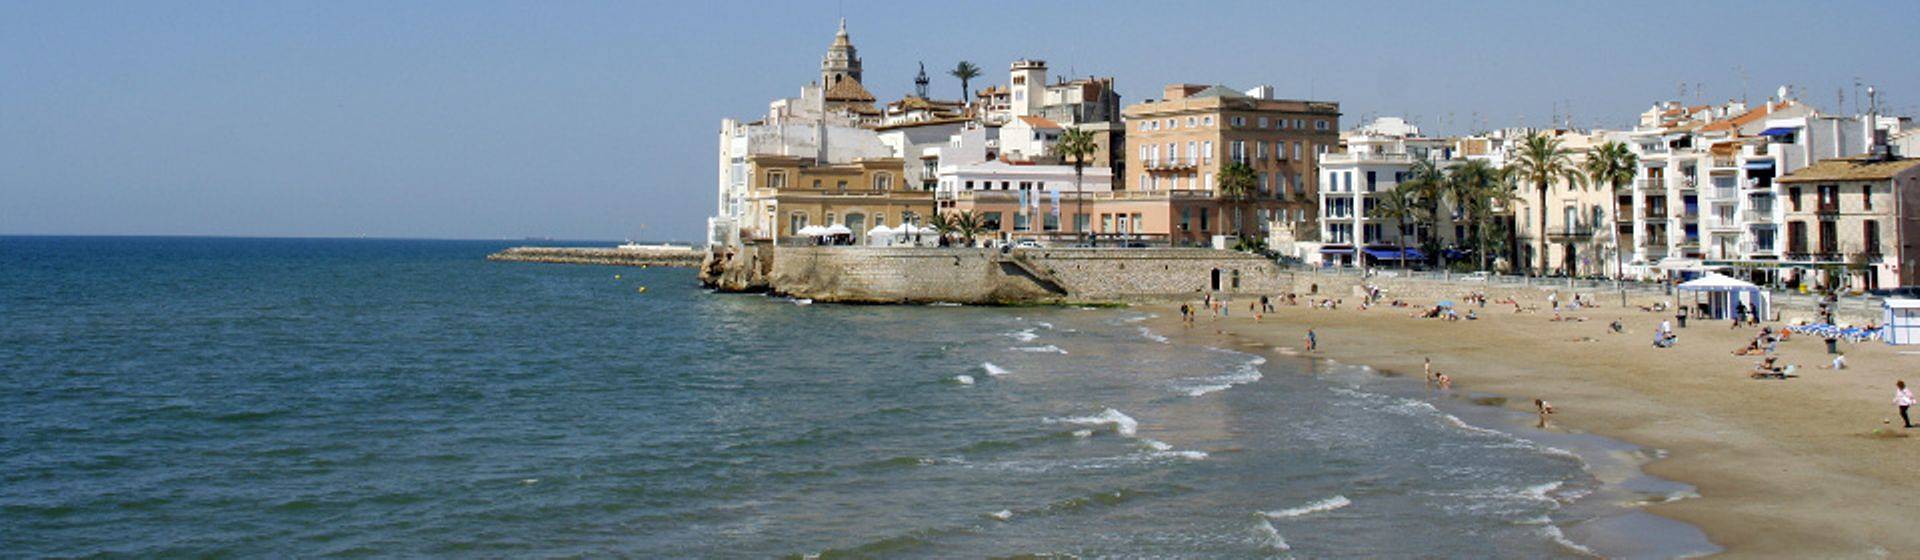 Holidays to Sitges Image